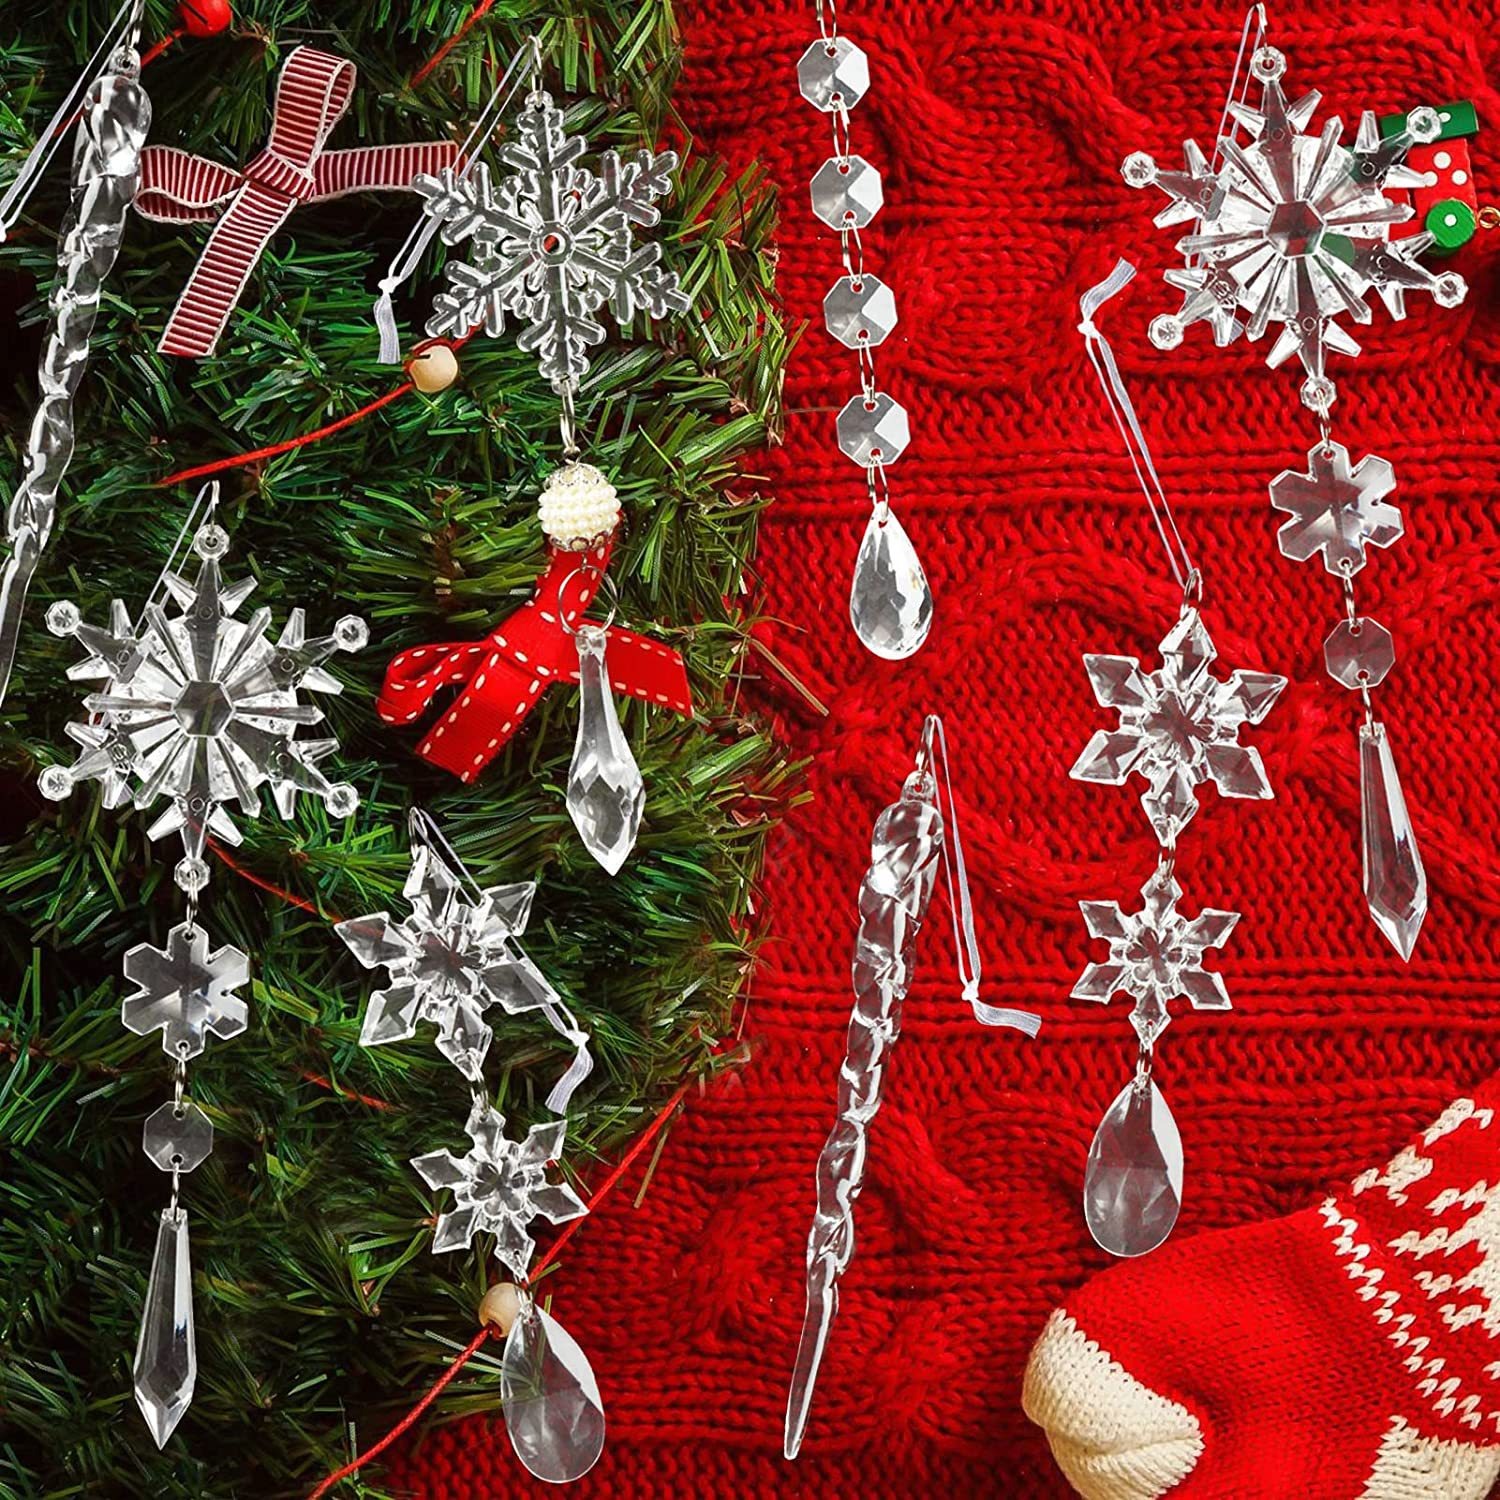 ❉ Crystal Christmas Ornaments ❉ Winter New Year Party Supplies